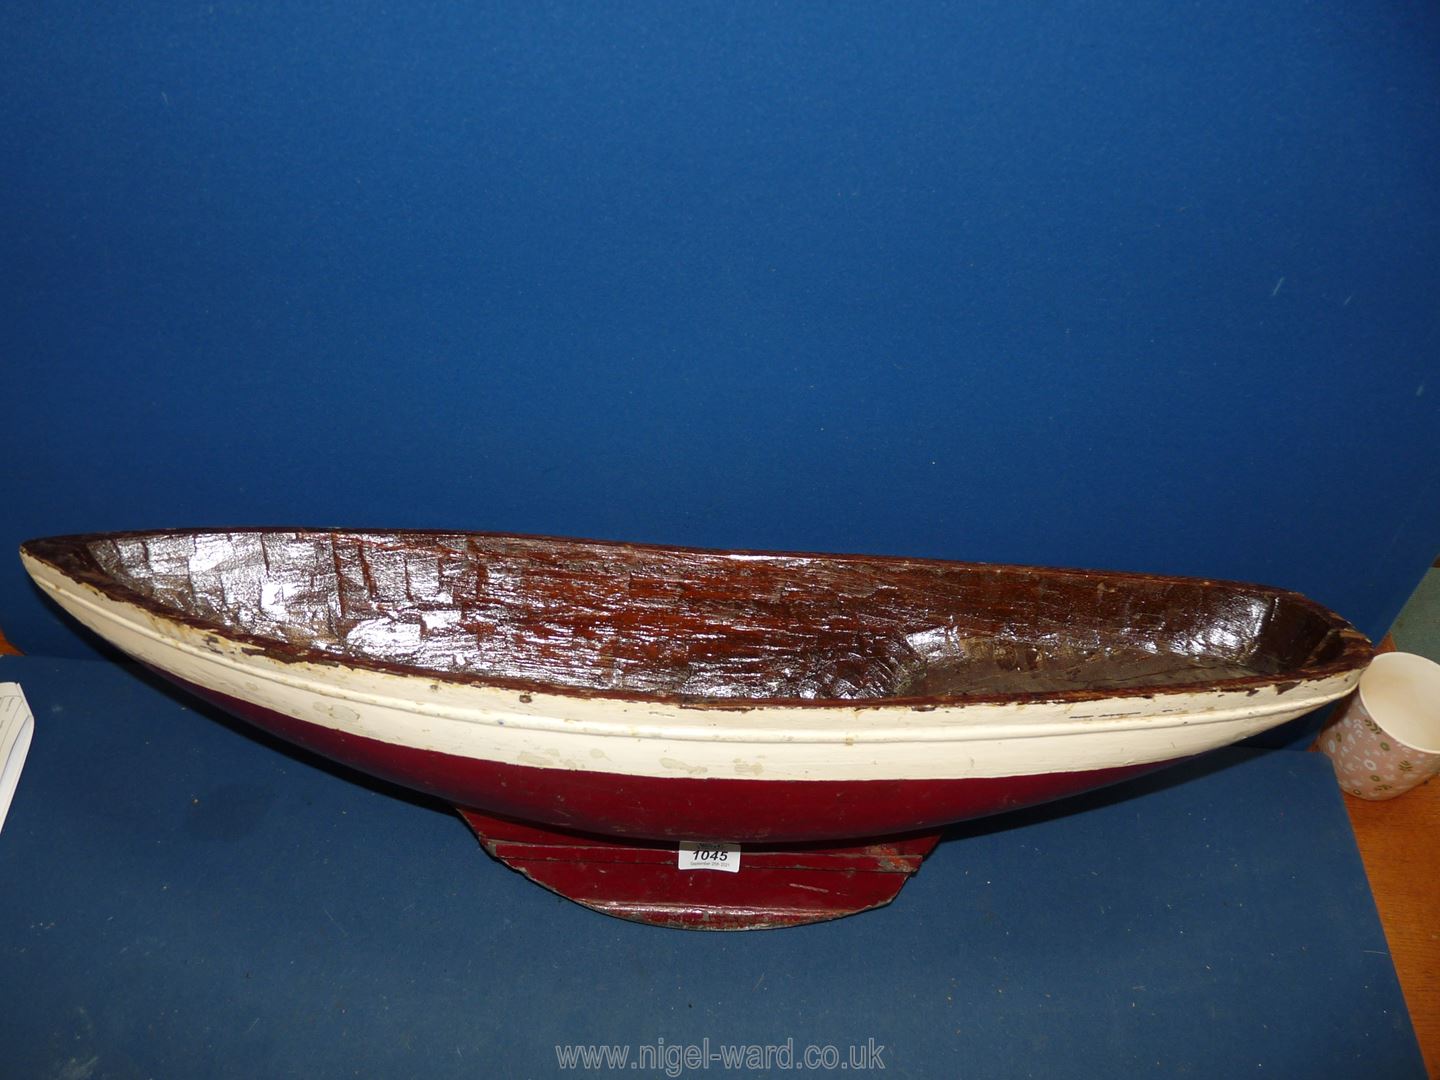 A hand carved red and white model boat, 30" long x 8" wide. - Image 2 of 3